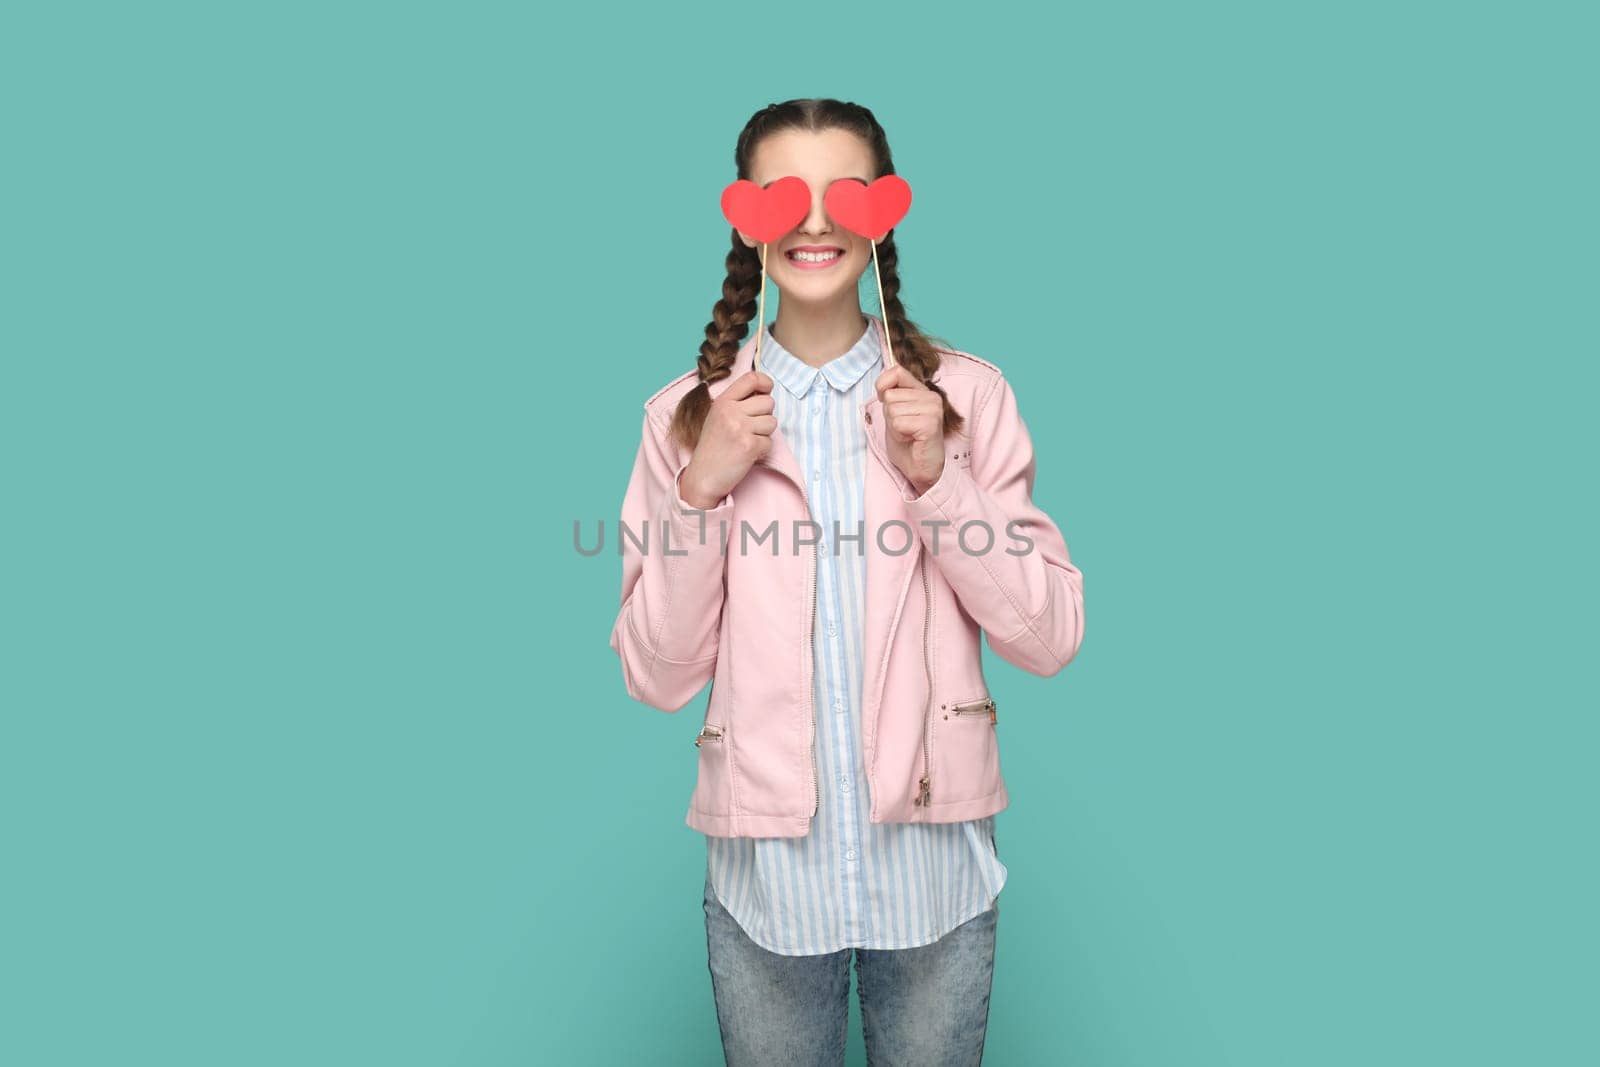 Portrait of romantic positive teenager girl with braids wearing pink jacket standing covering her eyes with two red hearts on stick. Indoor studio shot isolated on green background.